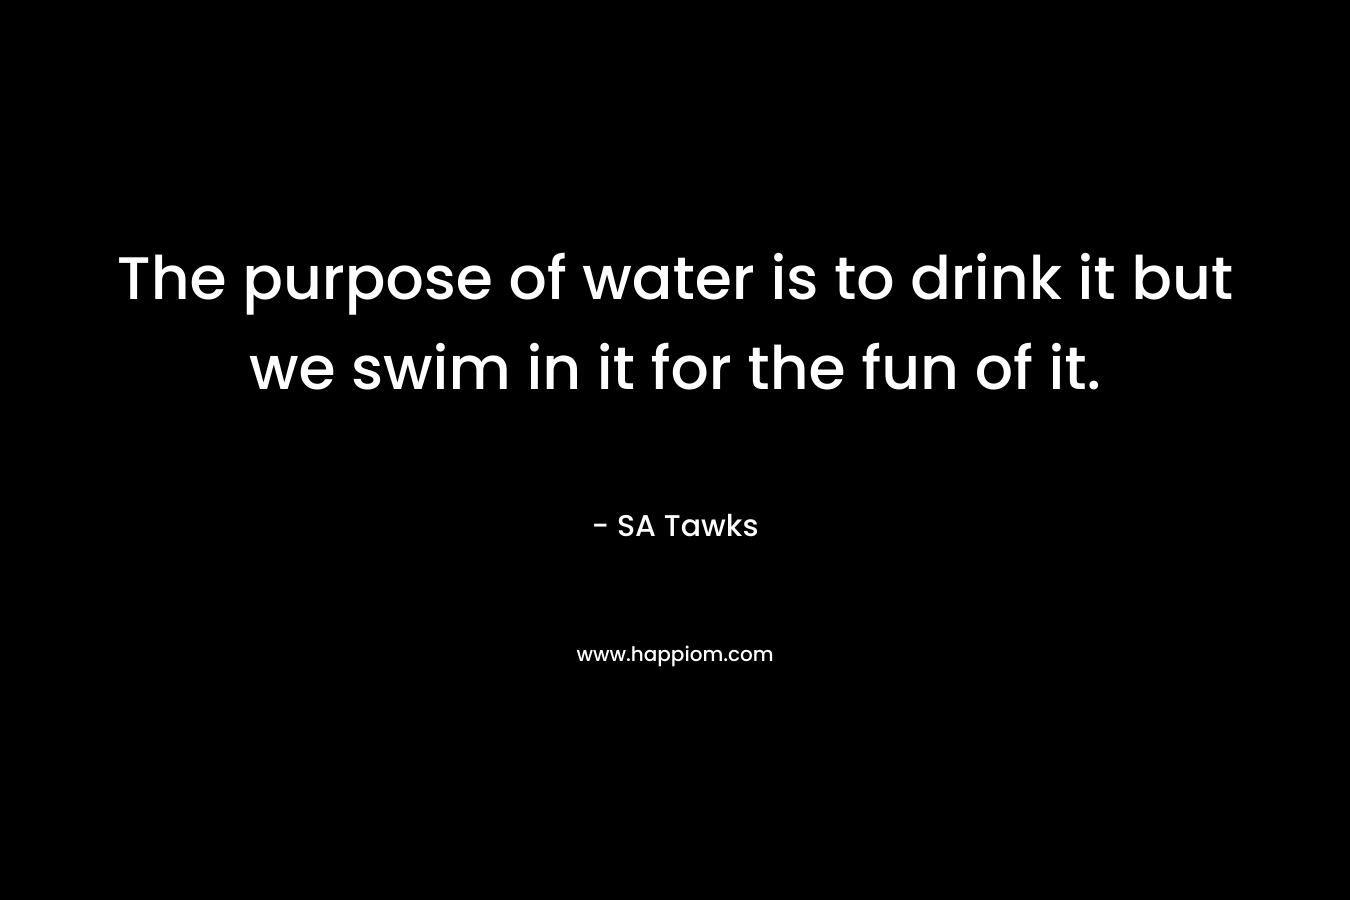 The purpose of water is to drink it but we swim in it for the fun of it.